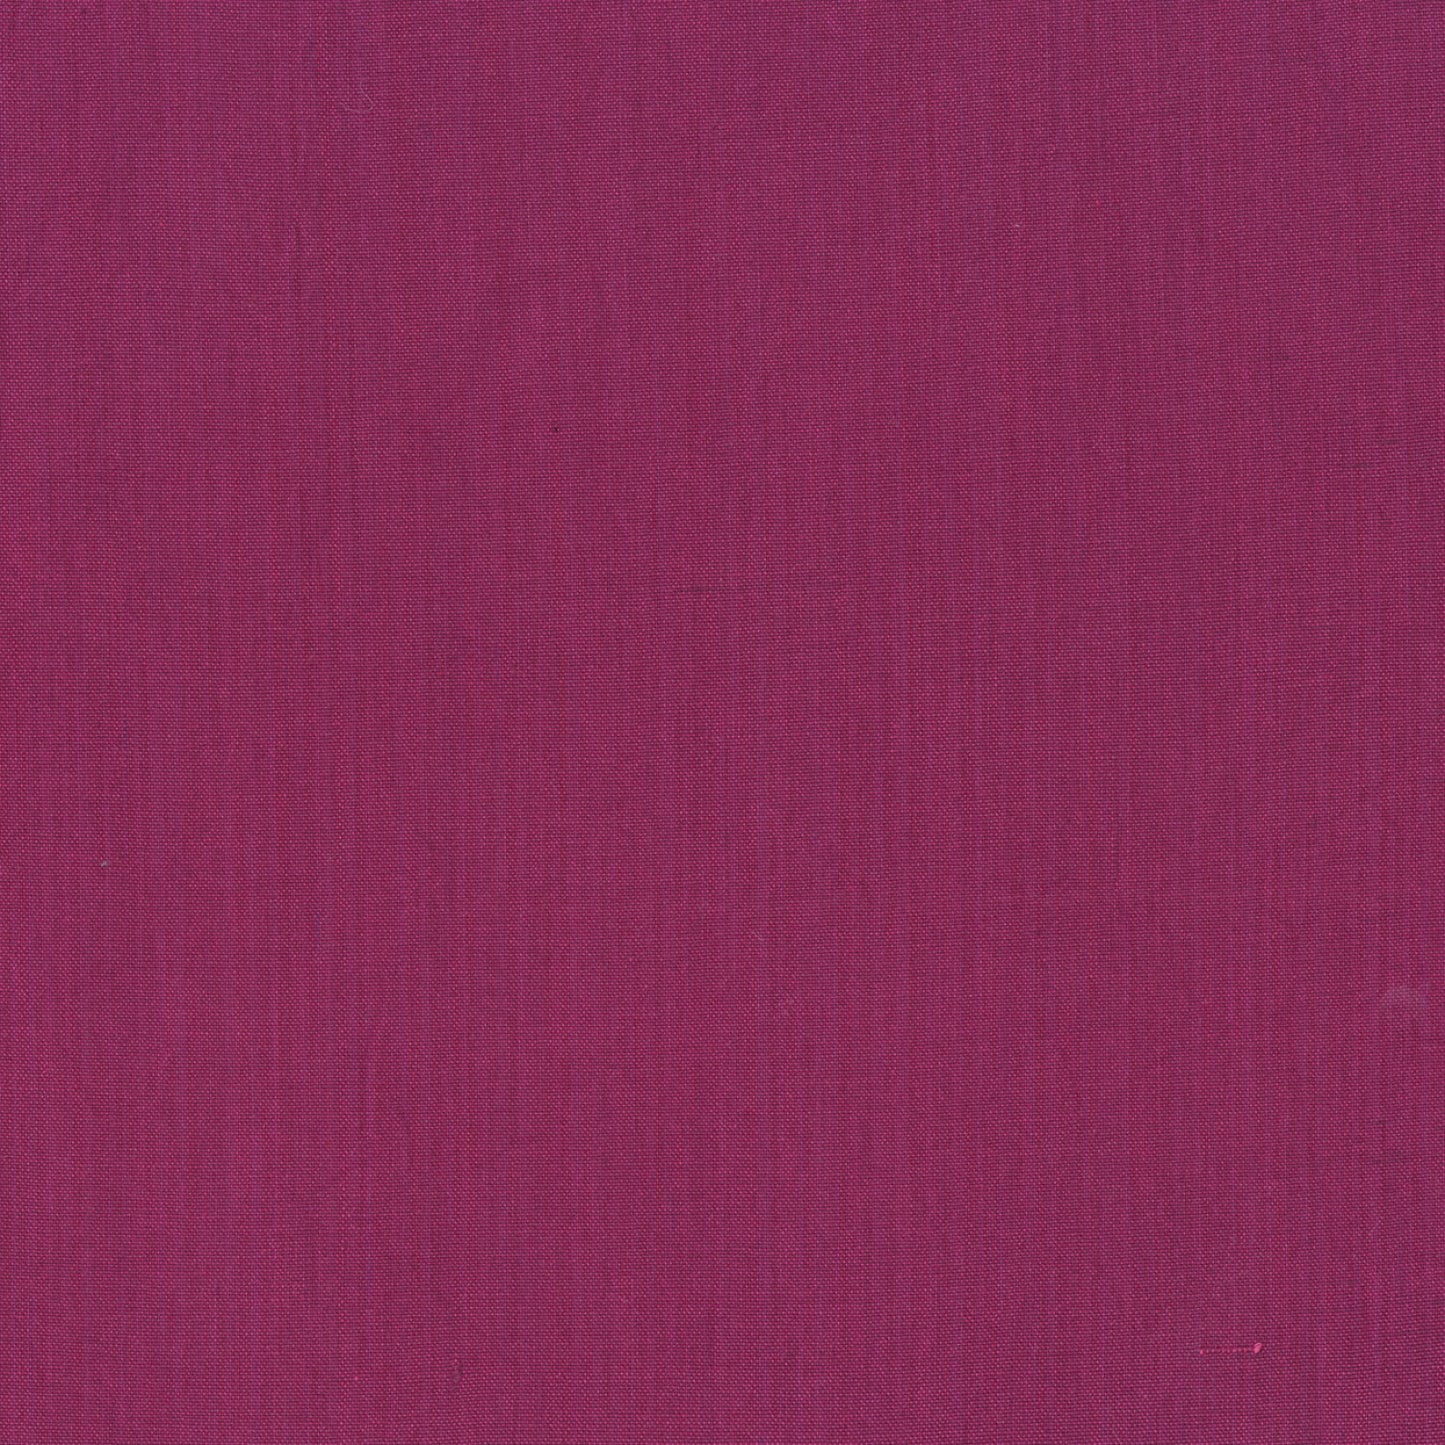 Manufacturer: Windham Fabrics Designer: Another Point of View Collection: Artisan Solids Print Name: Grape/Dark Pink Material: 100% Cotton  Weight: Quilting  SKU: WIND 40171-94 Width: 44 inches